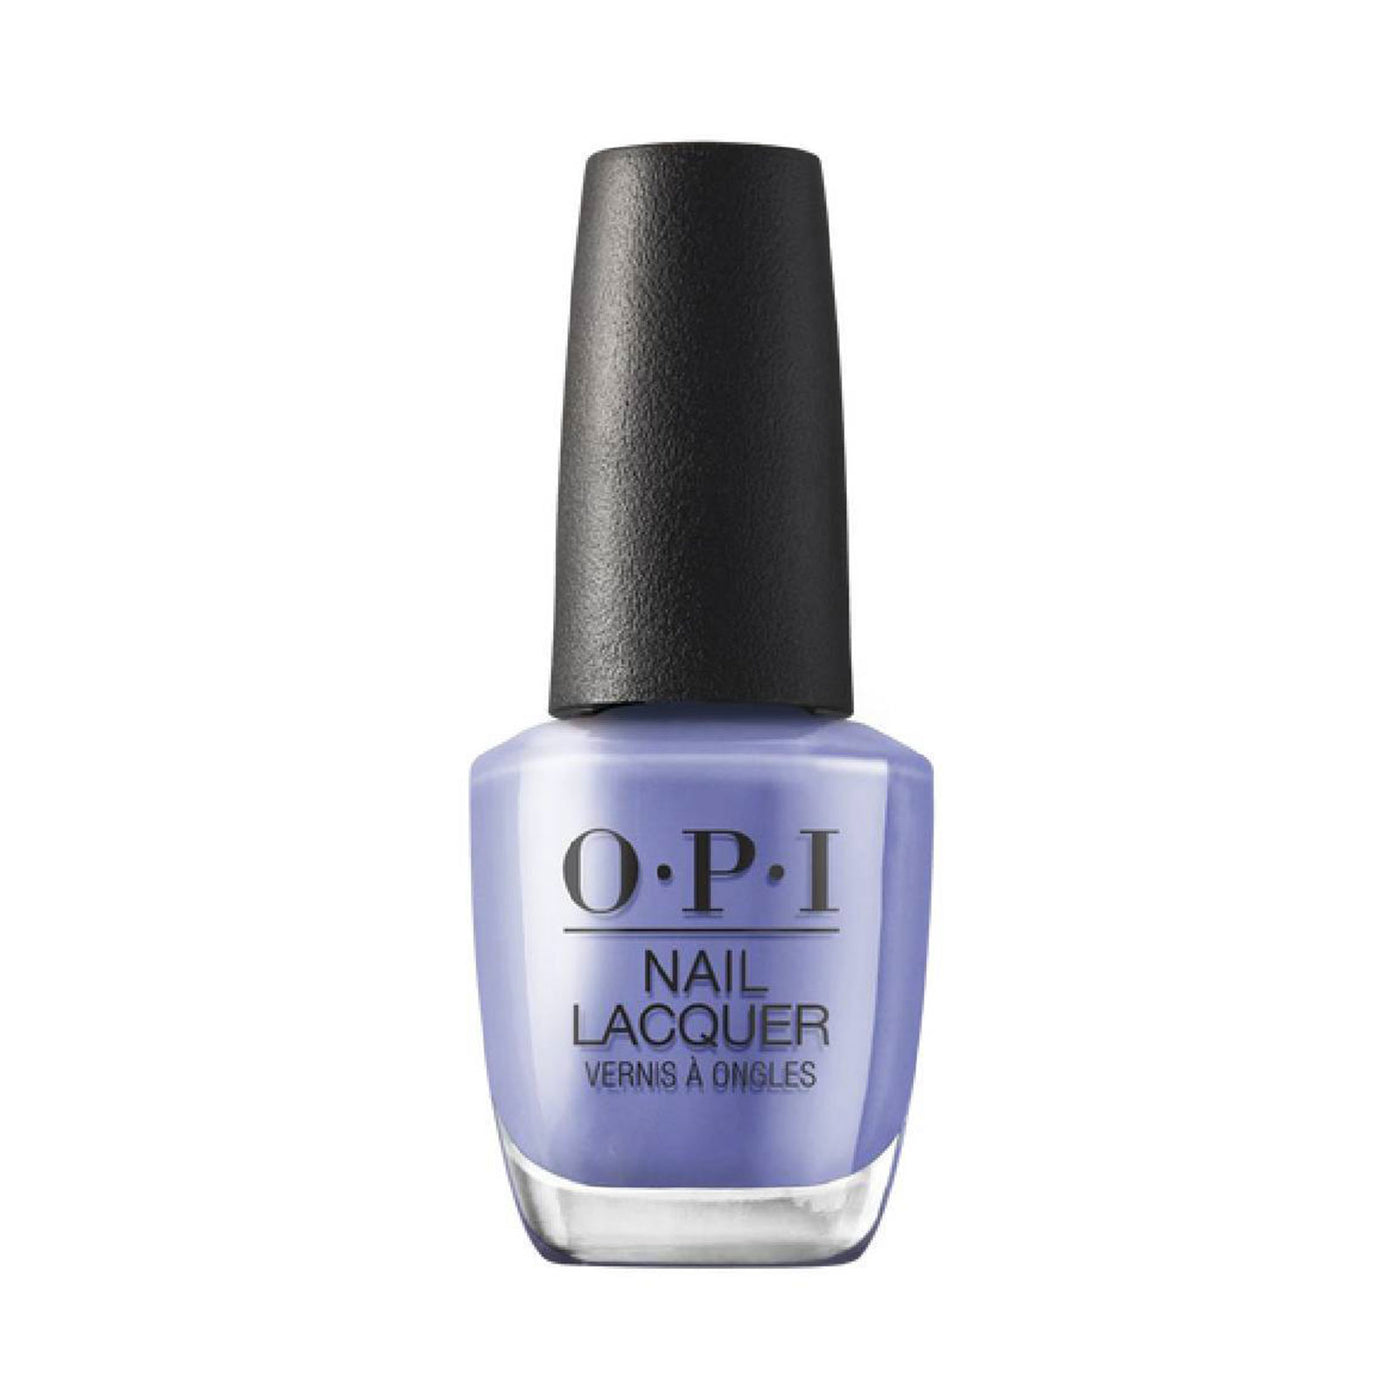 OPI Nail Lacquer NLH008 Oh You Sing, Dance, Act, and Produce? 15ml